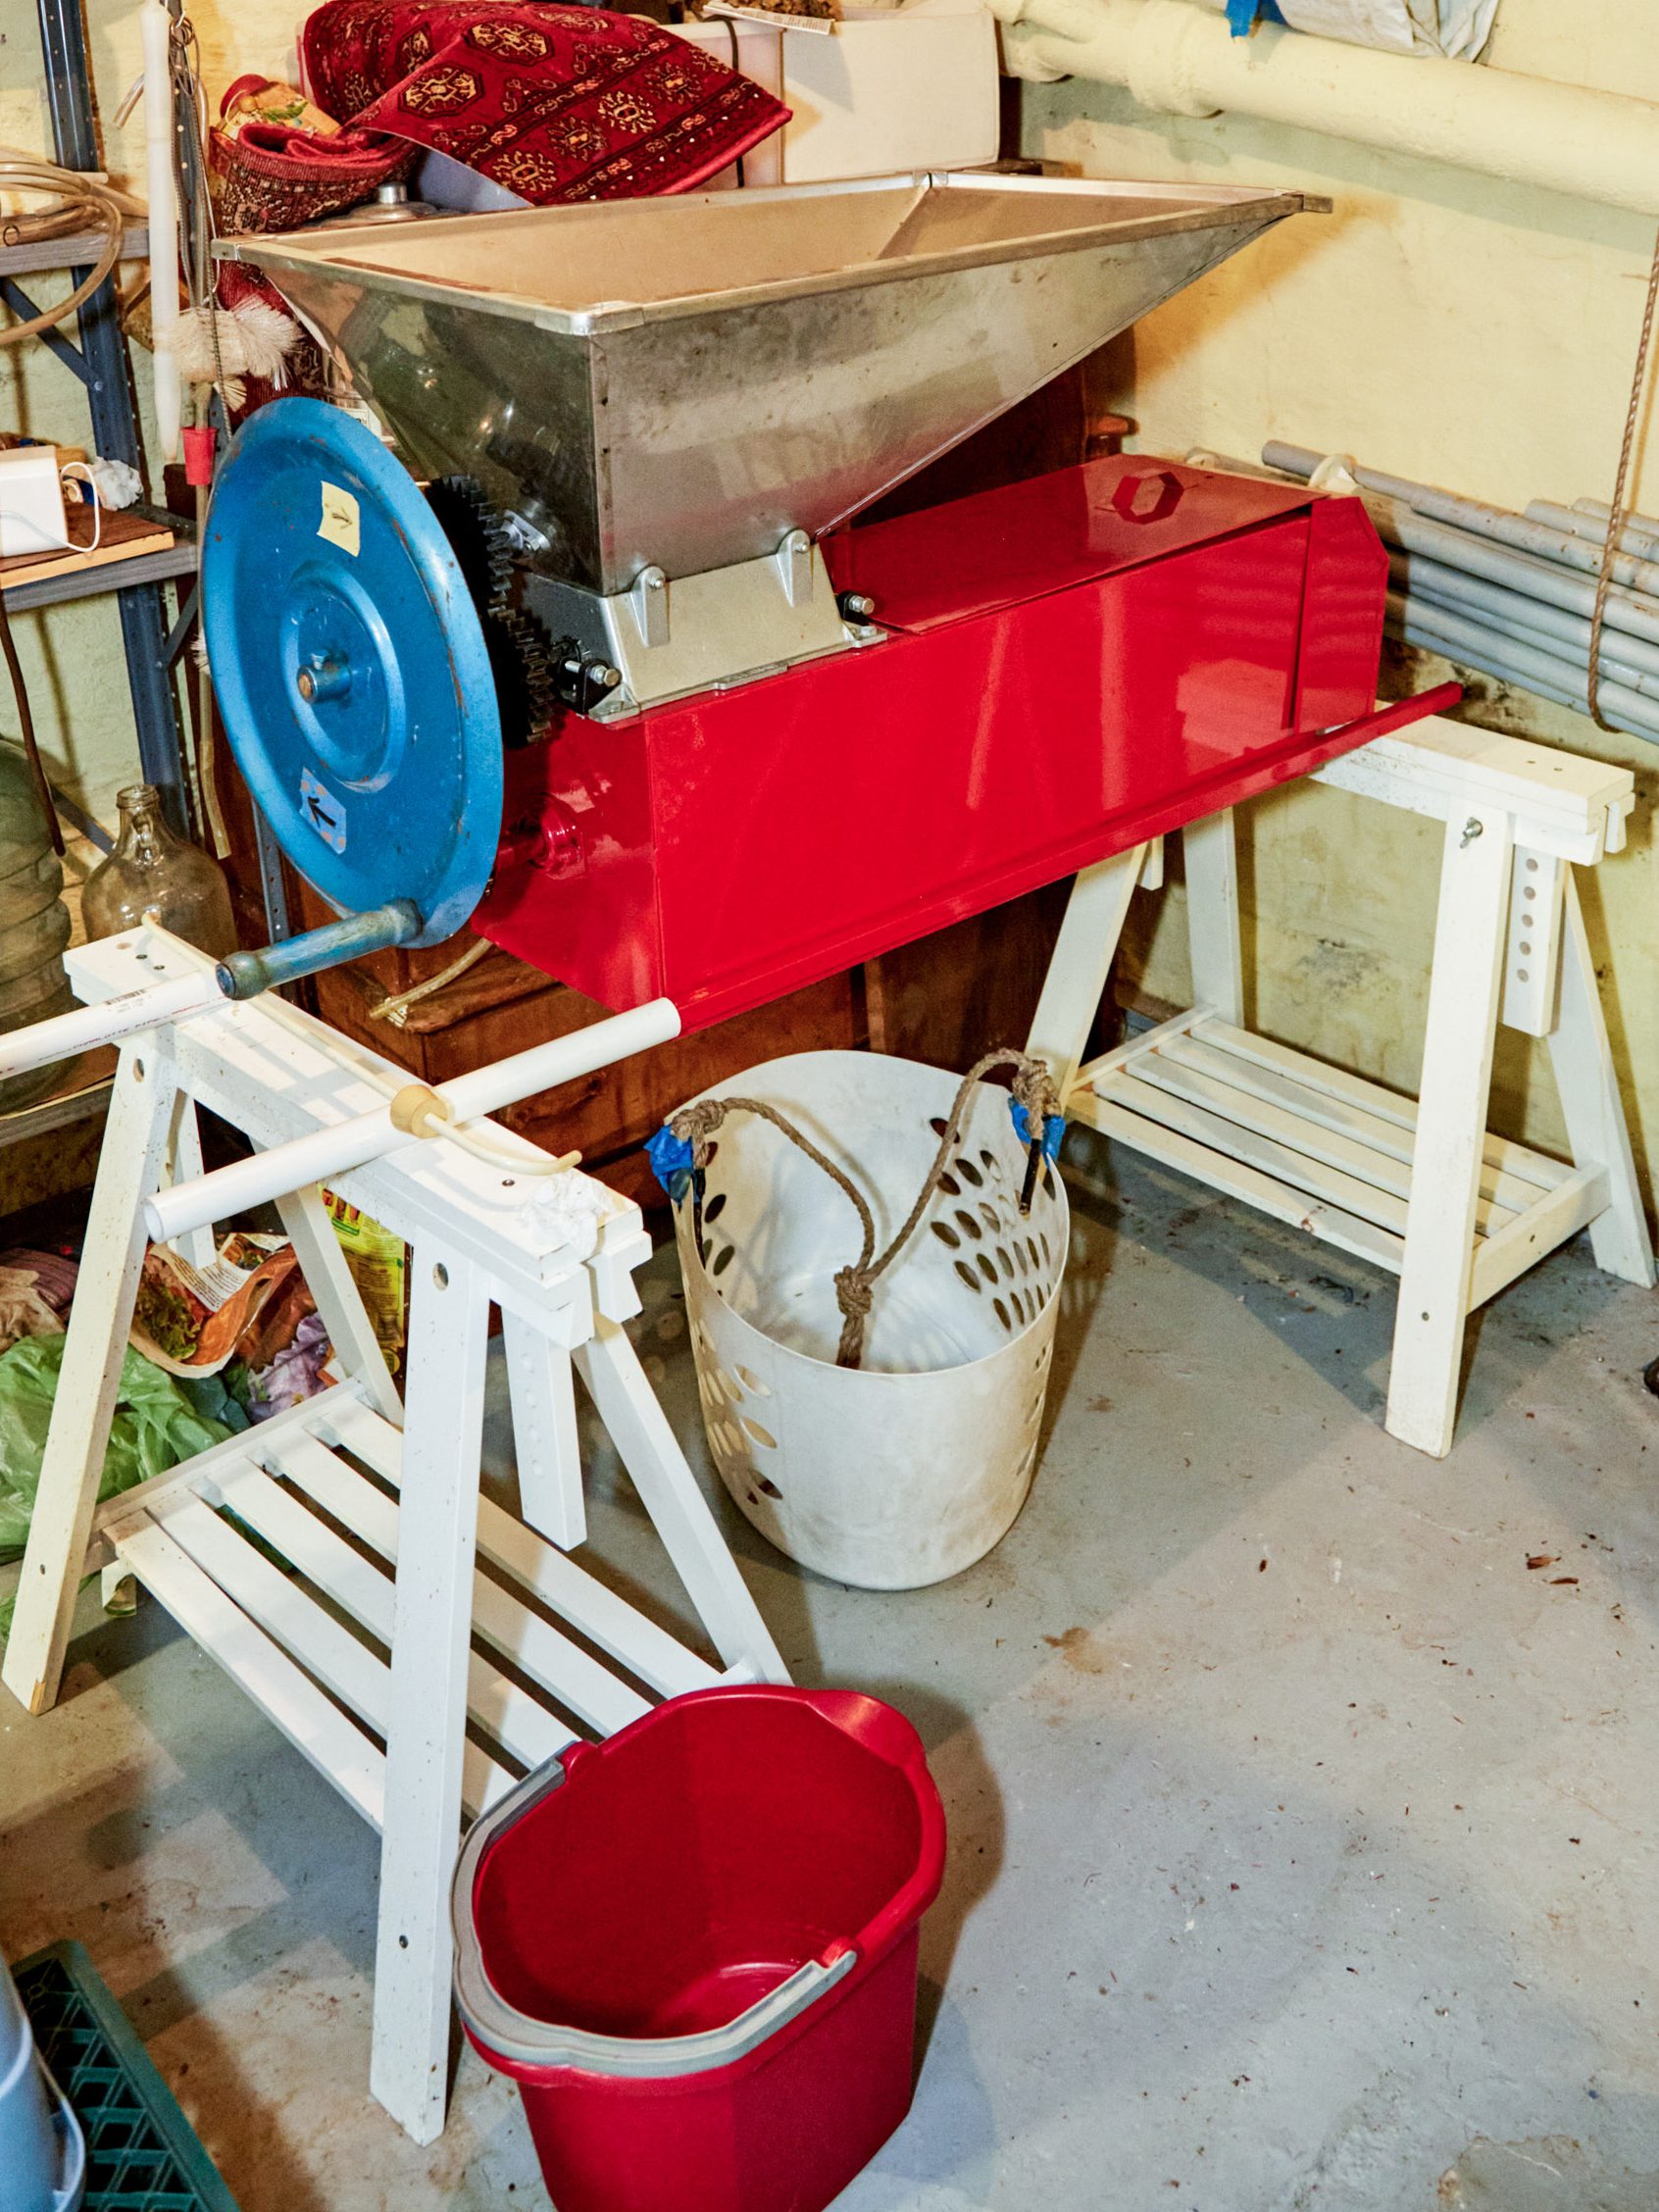 destemmer on a set of sawhorses, with several buckets around